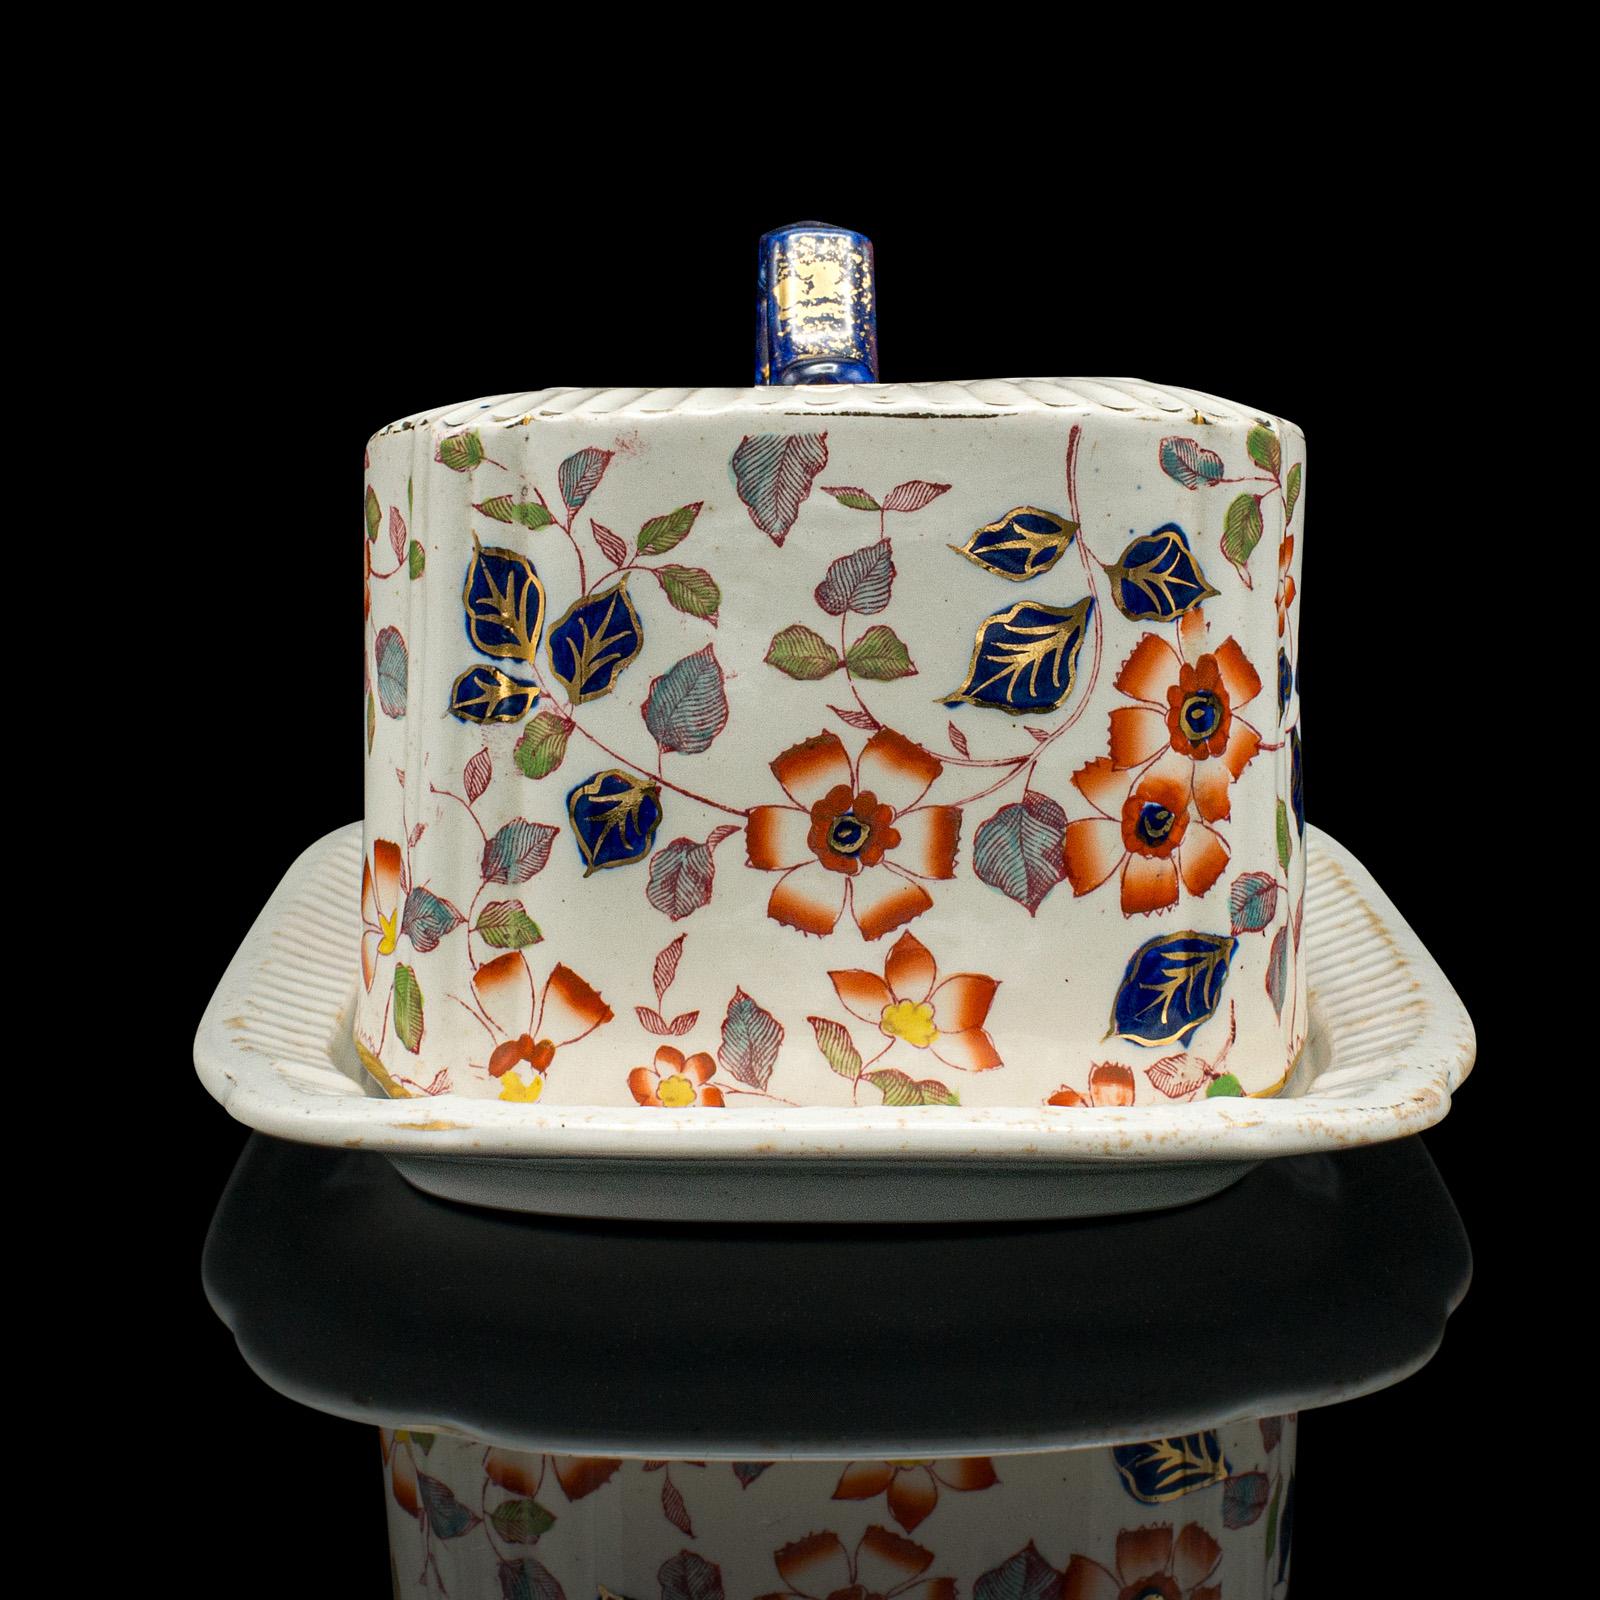 19th Century Antique Decorative Cheese Keeper, English, Ceramic, Butter Dish, Victorian, 1900 For Sale